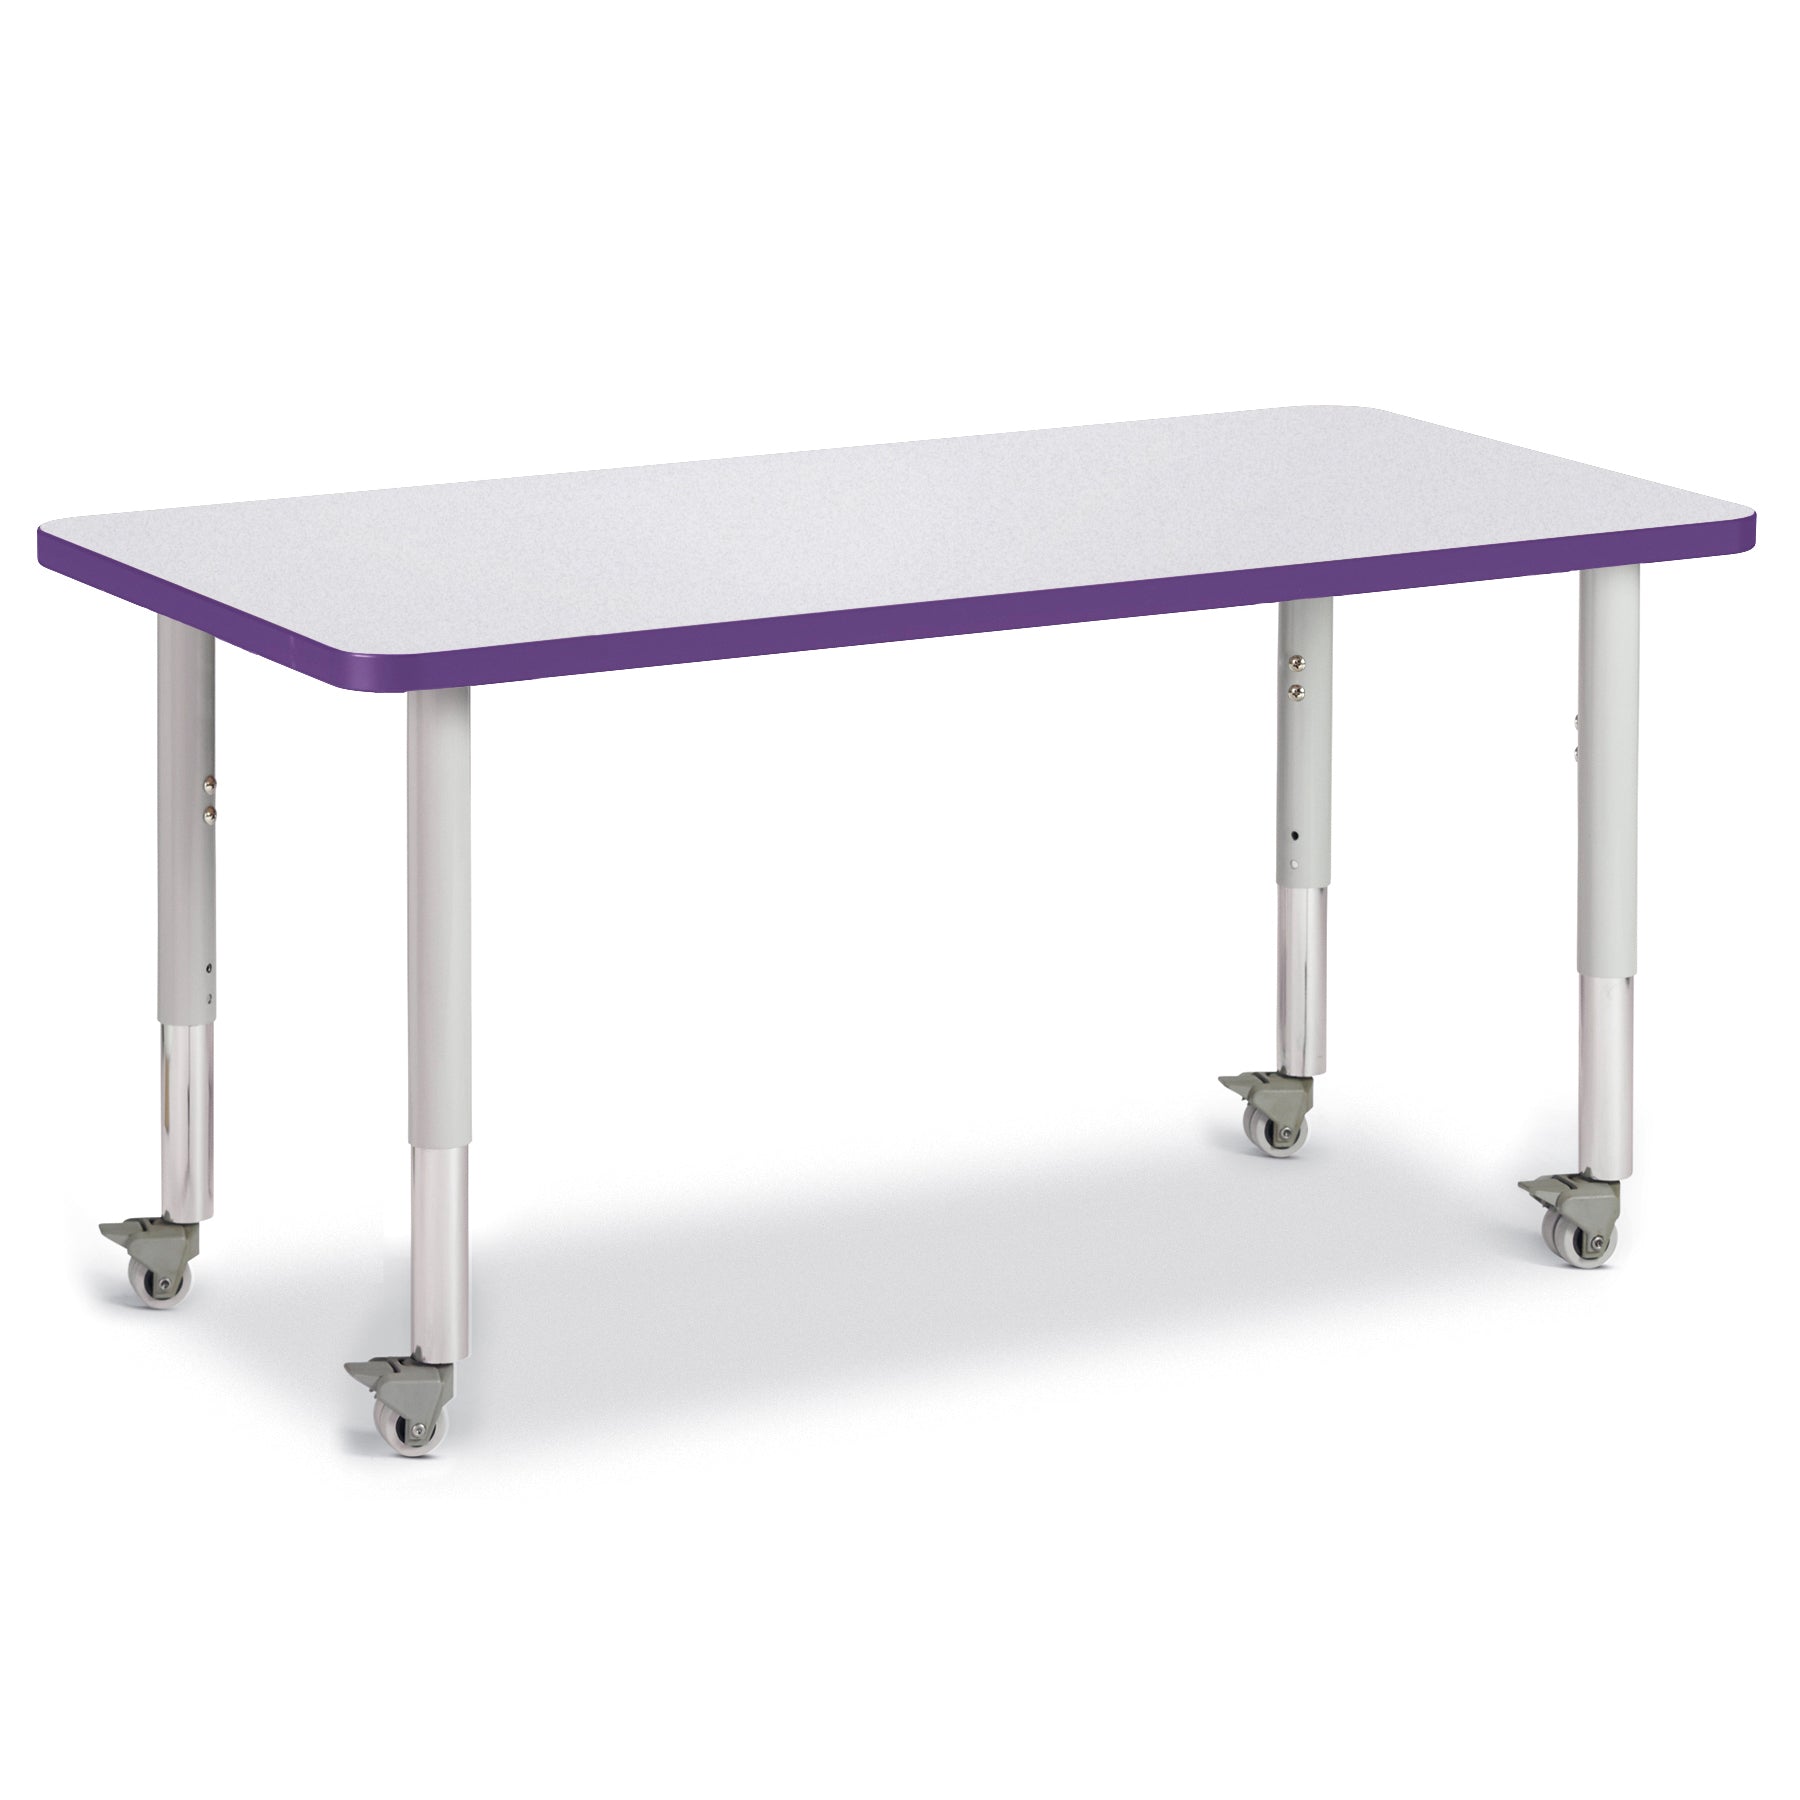 6403JCM004, Berries Rectangle Activity Table - 24" X 48", Mobile - Freckled Gray/Purple/Gray